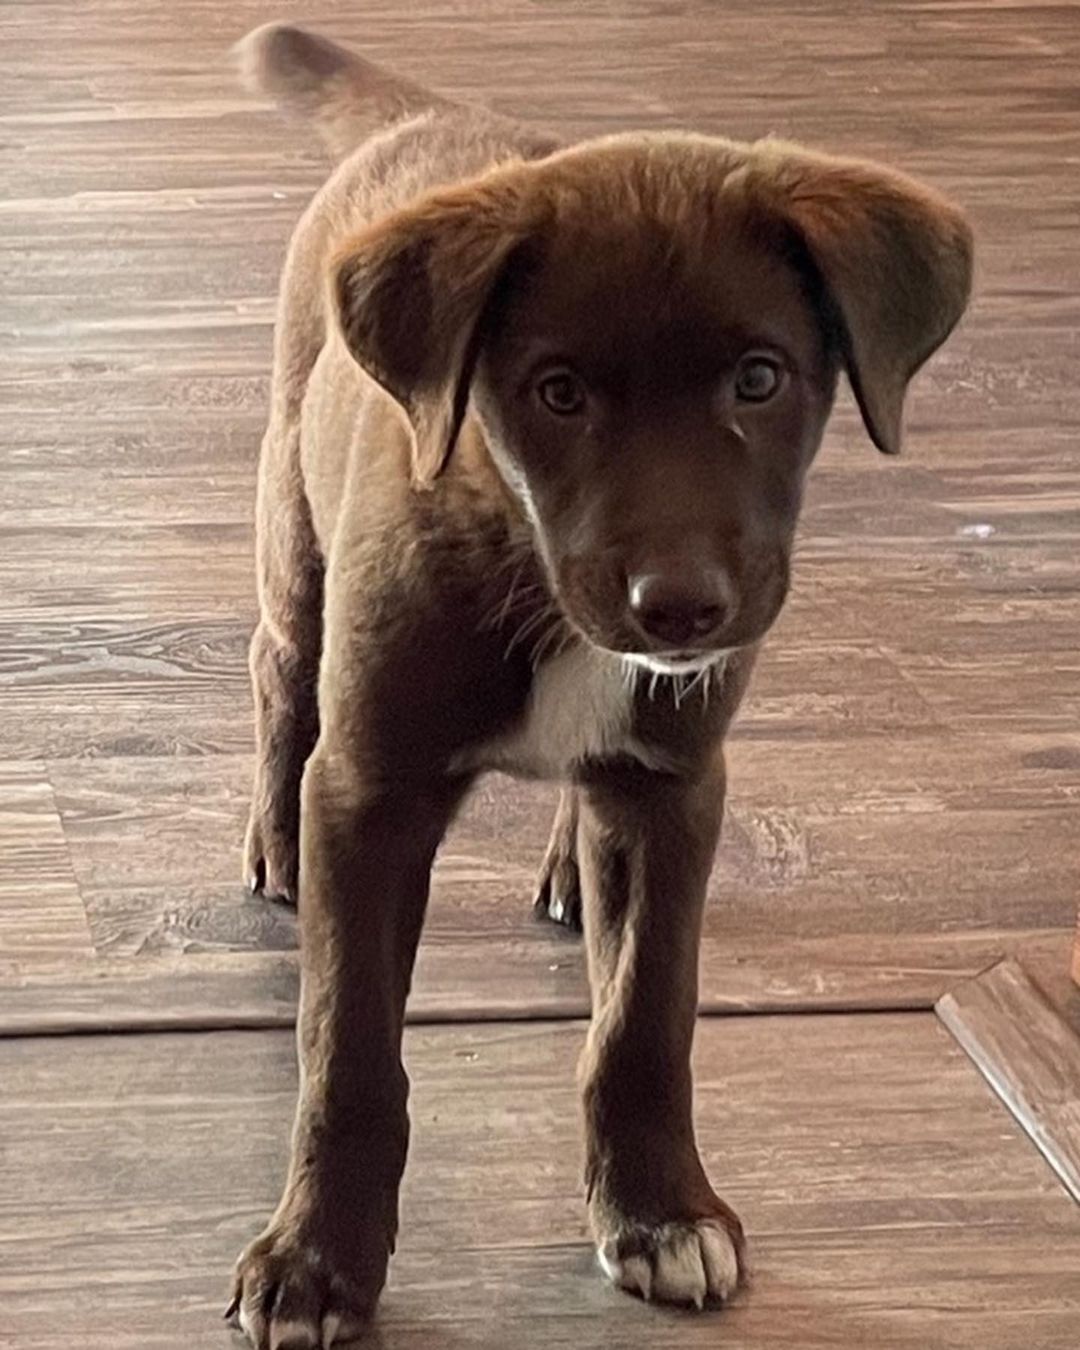 **ADOPTED** Meet Fudgie , 12 week old lab/Aussie mix. I’m full of puppy energy but I sleep all night in my crate. We are getting there with potty training but I’ll need some practice. I love to play with toys and I’ve learned the word no very well. I also come when I’m called. I hope to be the newest member of your family. If already approved please email us at oarnwny@gmail.com Applications: www.oarwny.org